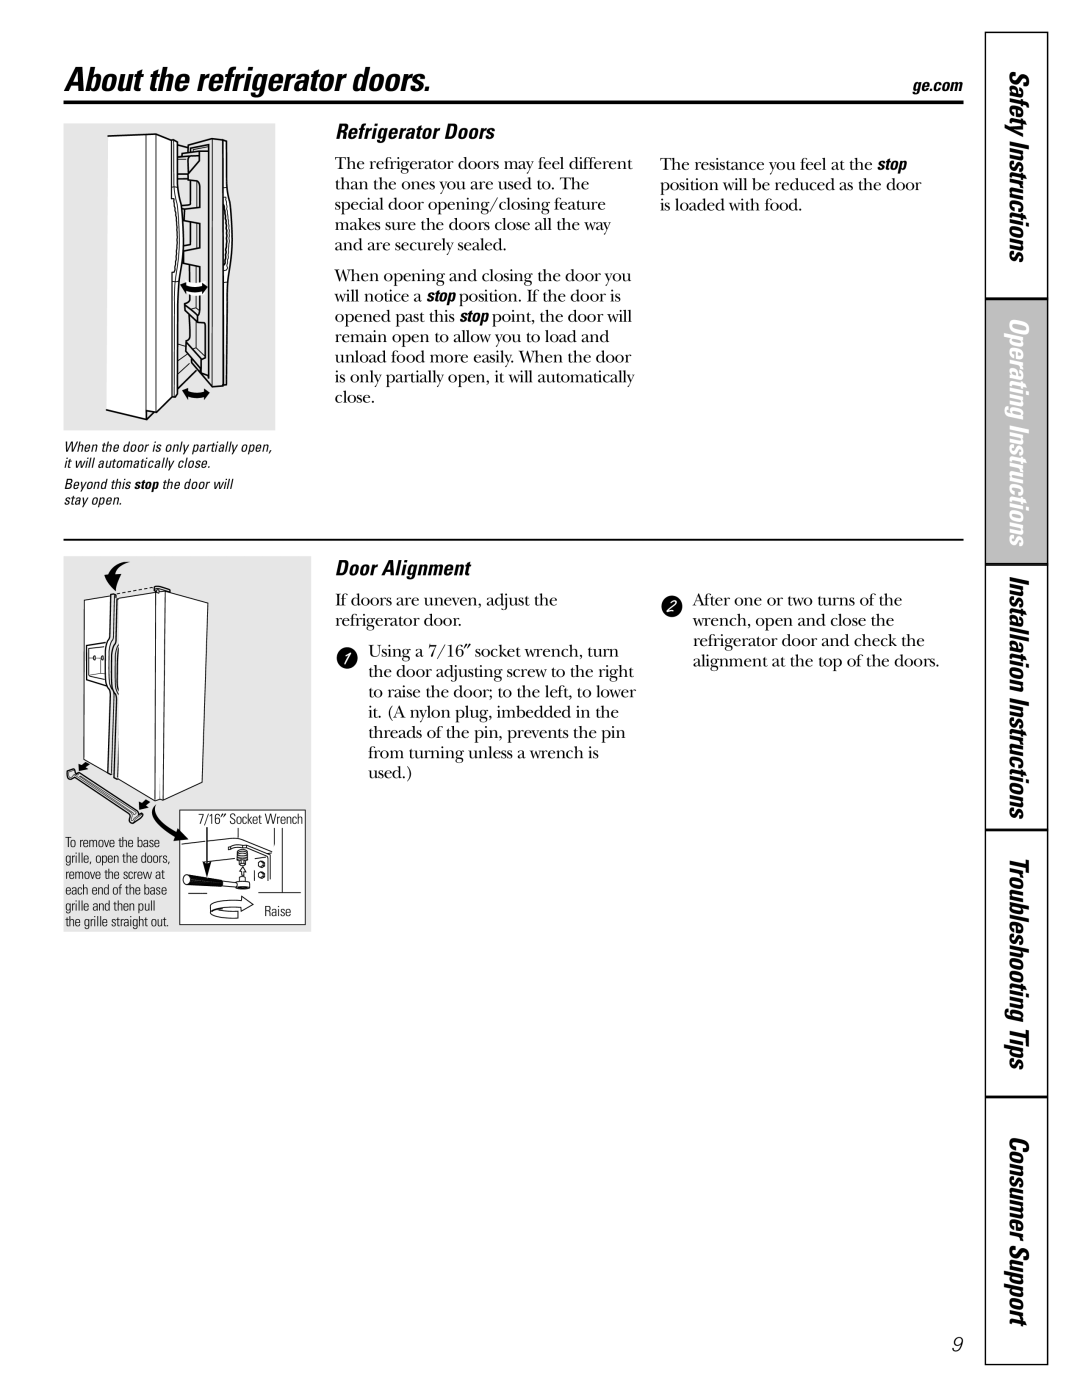 GE 22, 23, 25, 27 About the refrigerator doors, Instructions Operating Instructions, Refrigerator Doors, Door Alignment 